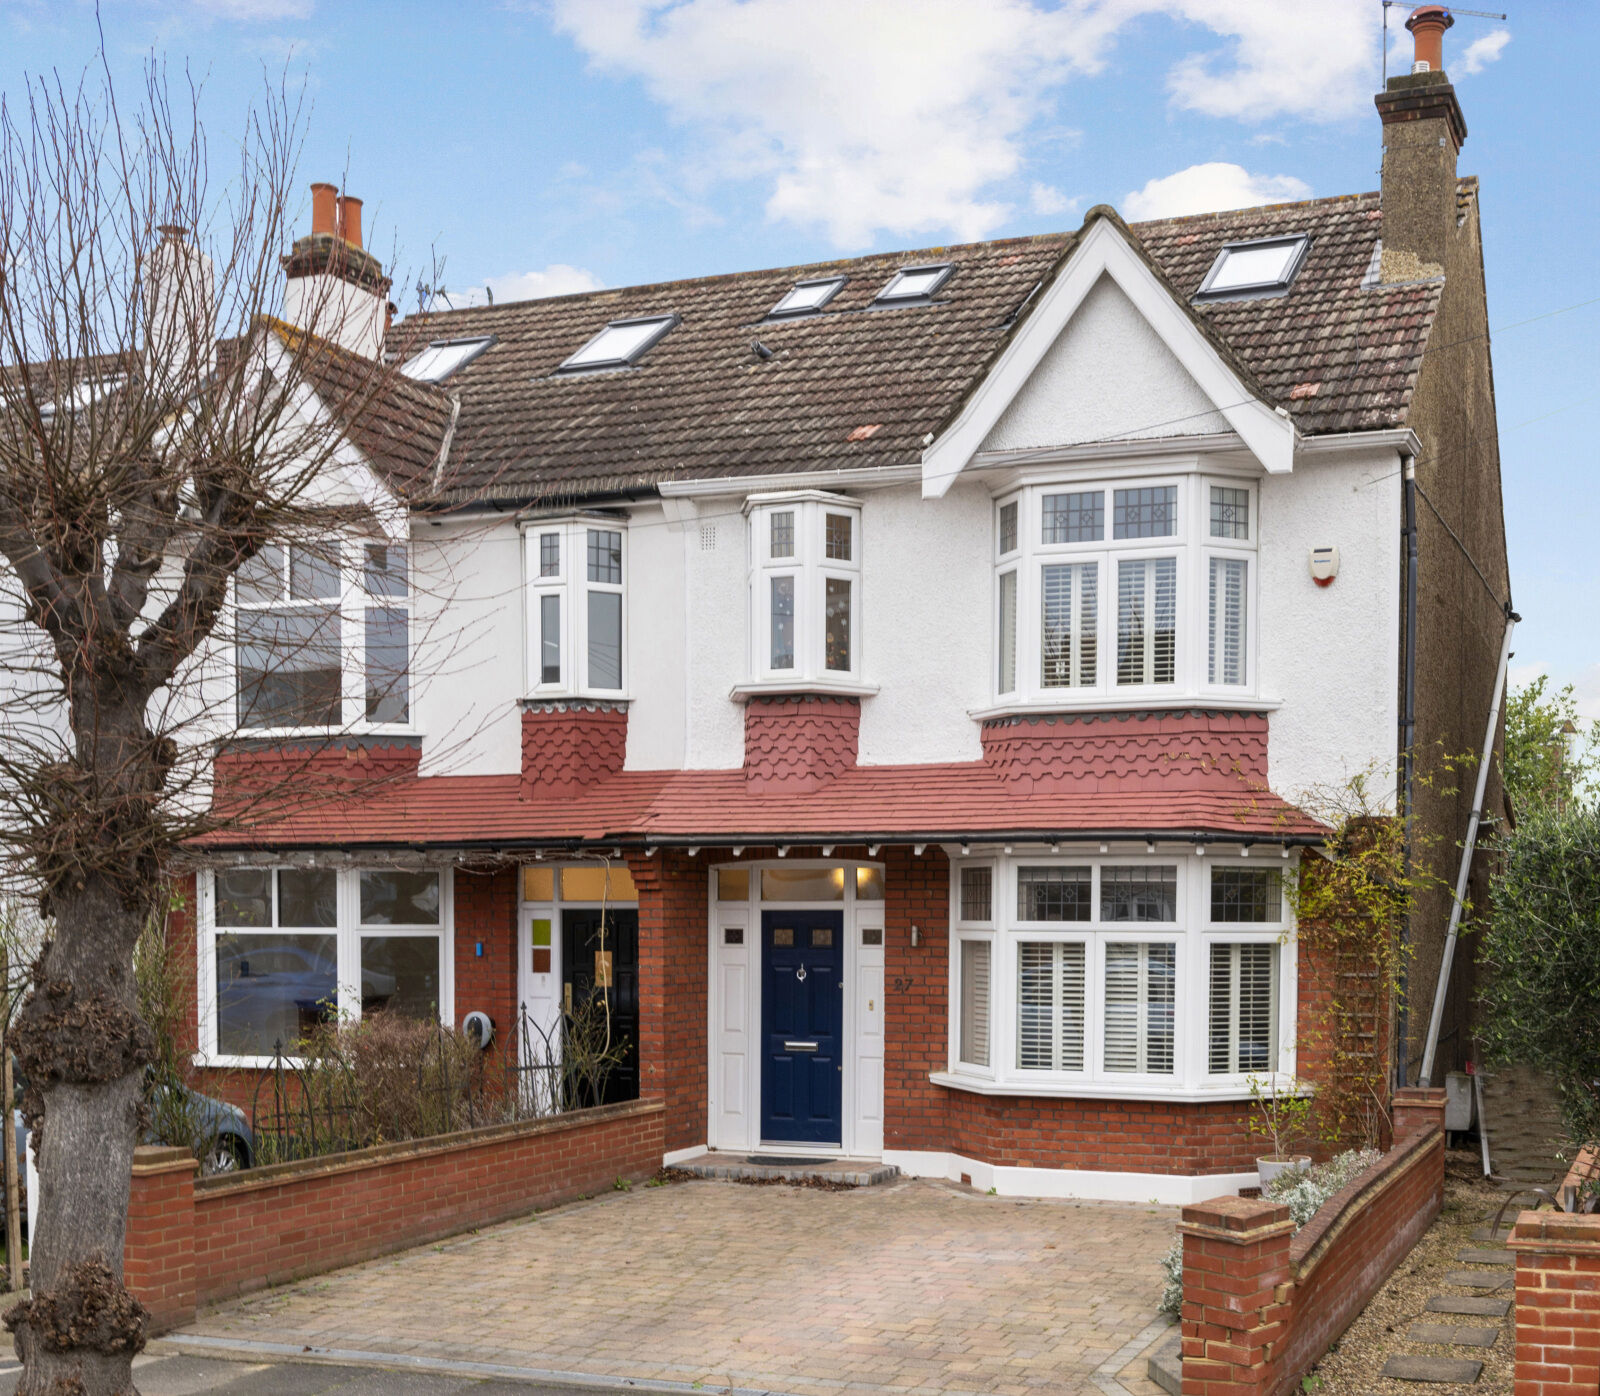 4 bedroom semi detached house for sale Camberley Avenue, West Wimbledon, SW20, main image